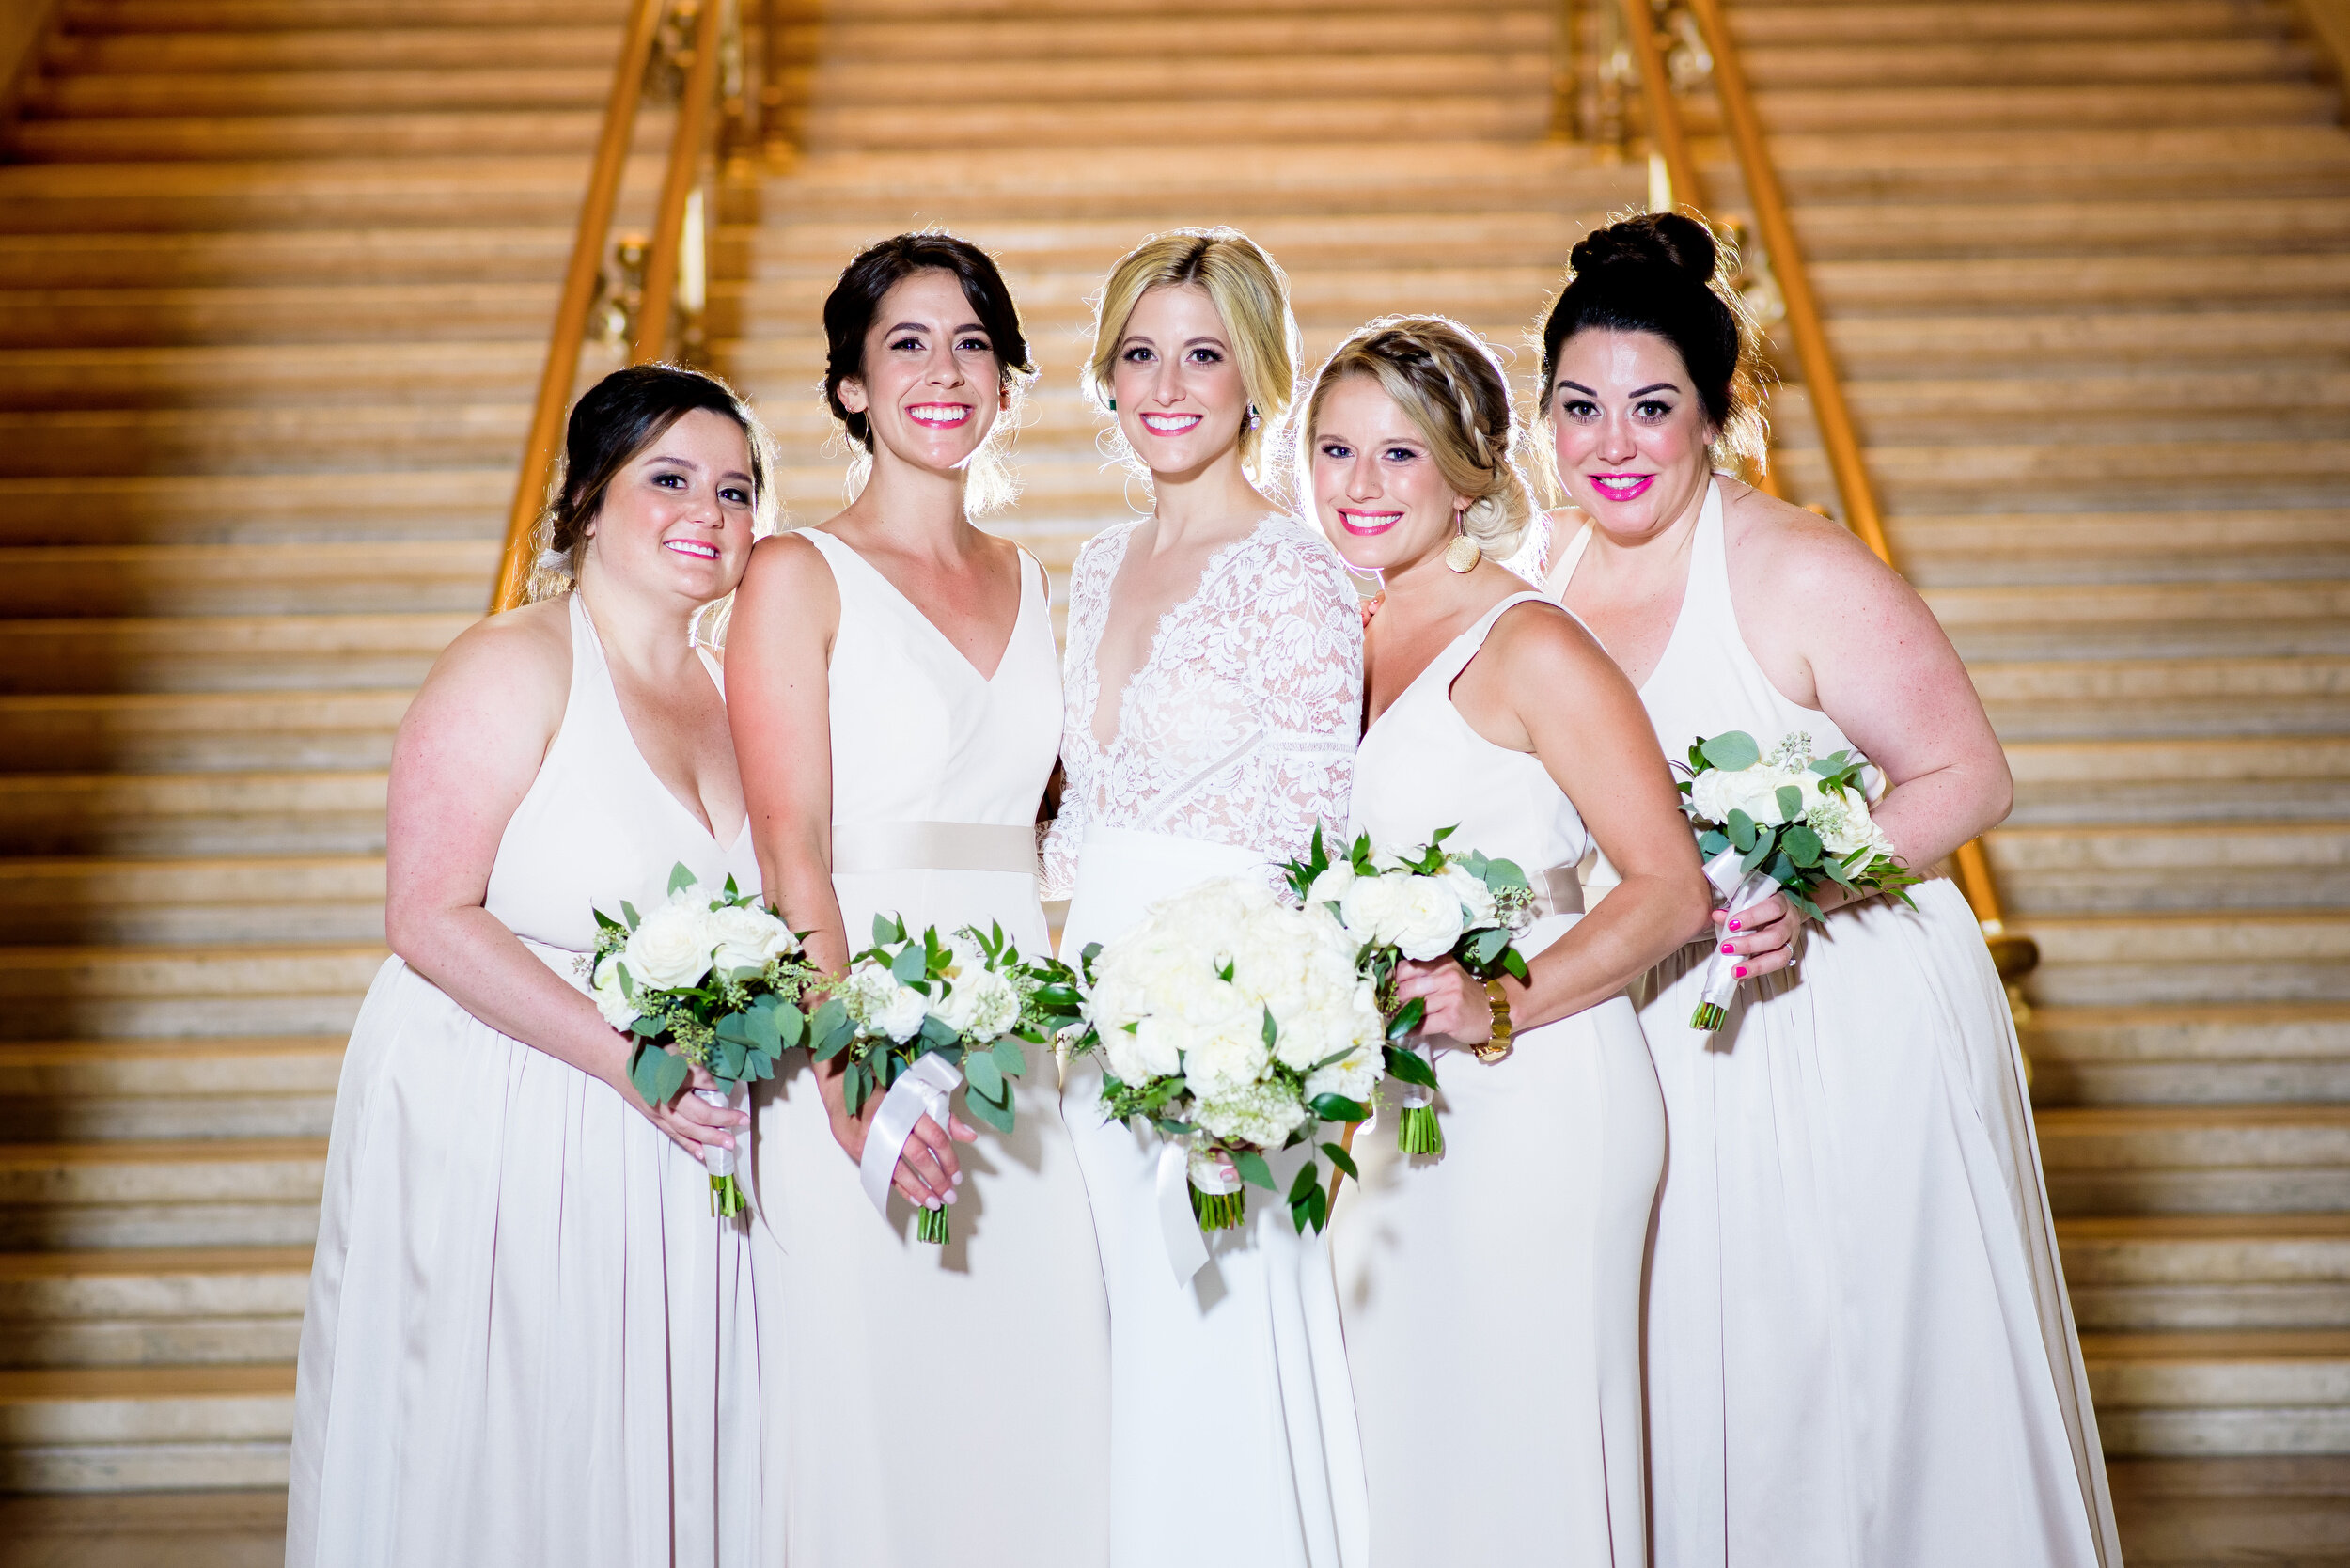 Bride and bridesmaids portrait at Union Station Chicago: Geraghty Chicago wedding photography captured by J. Brown Photography.